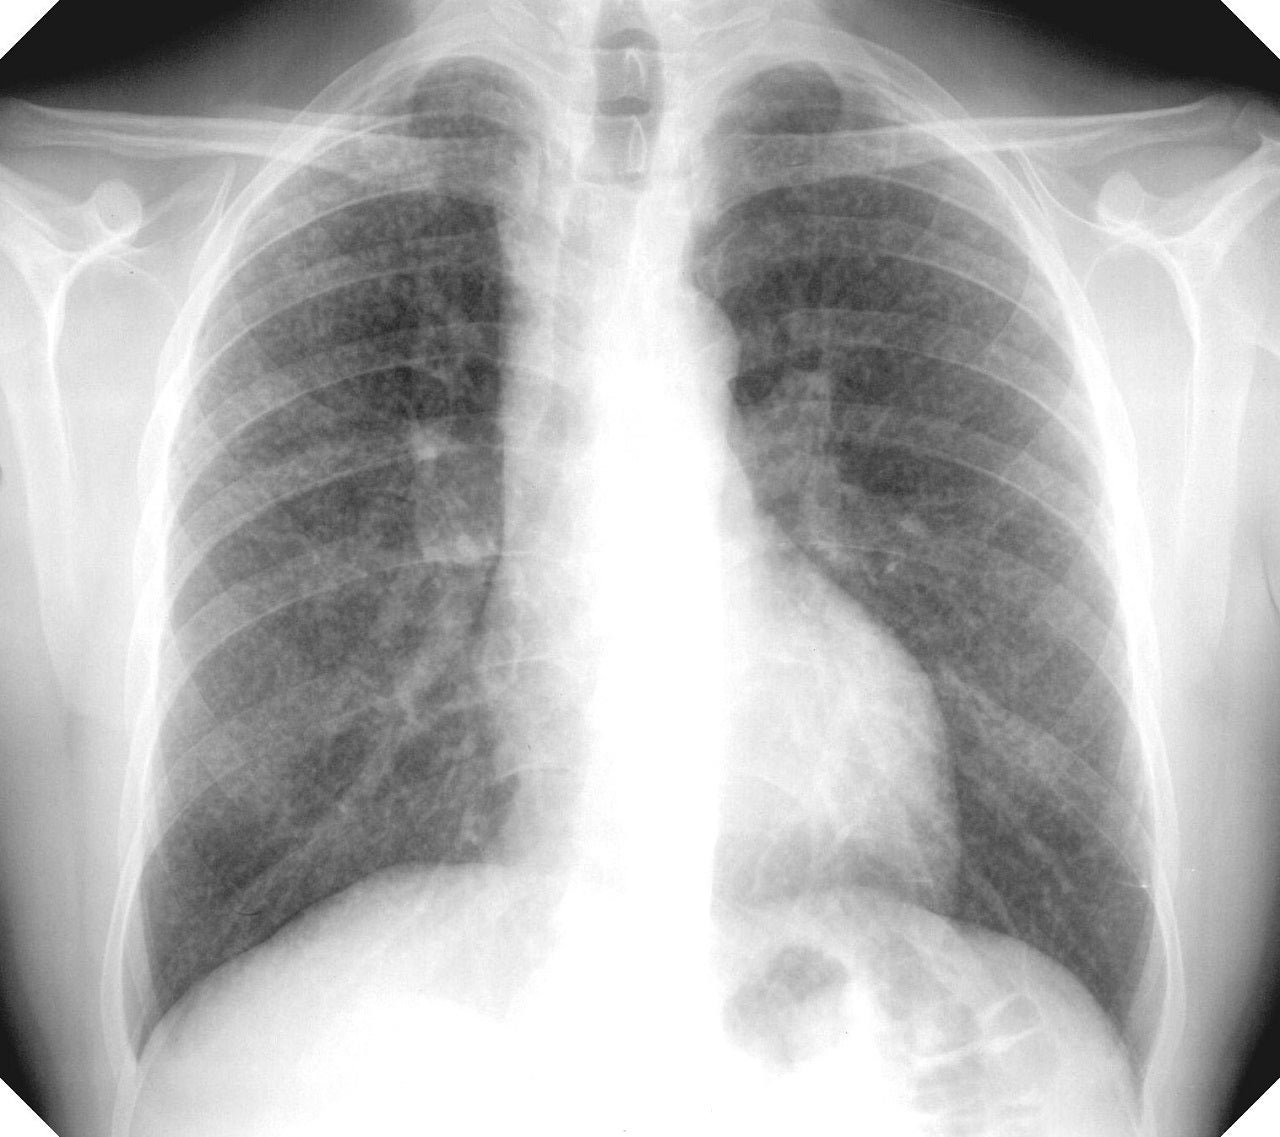 Lung disease caused by silica dust